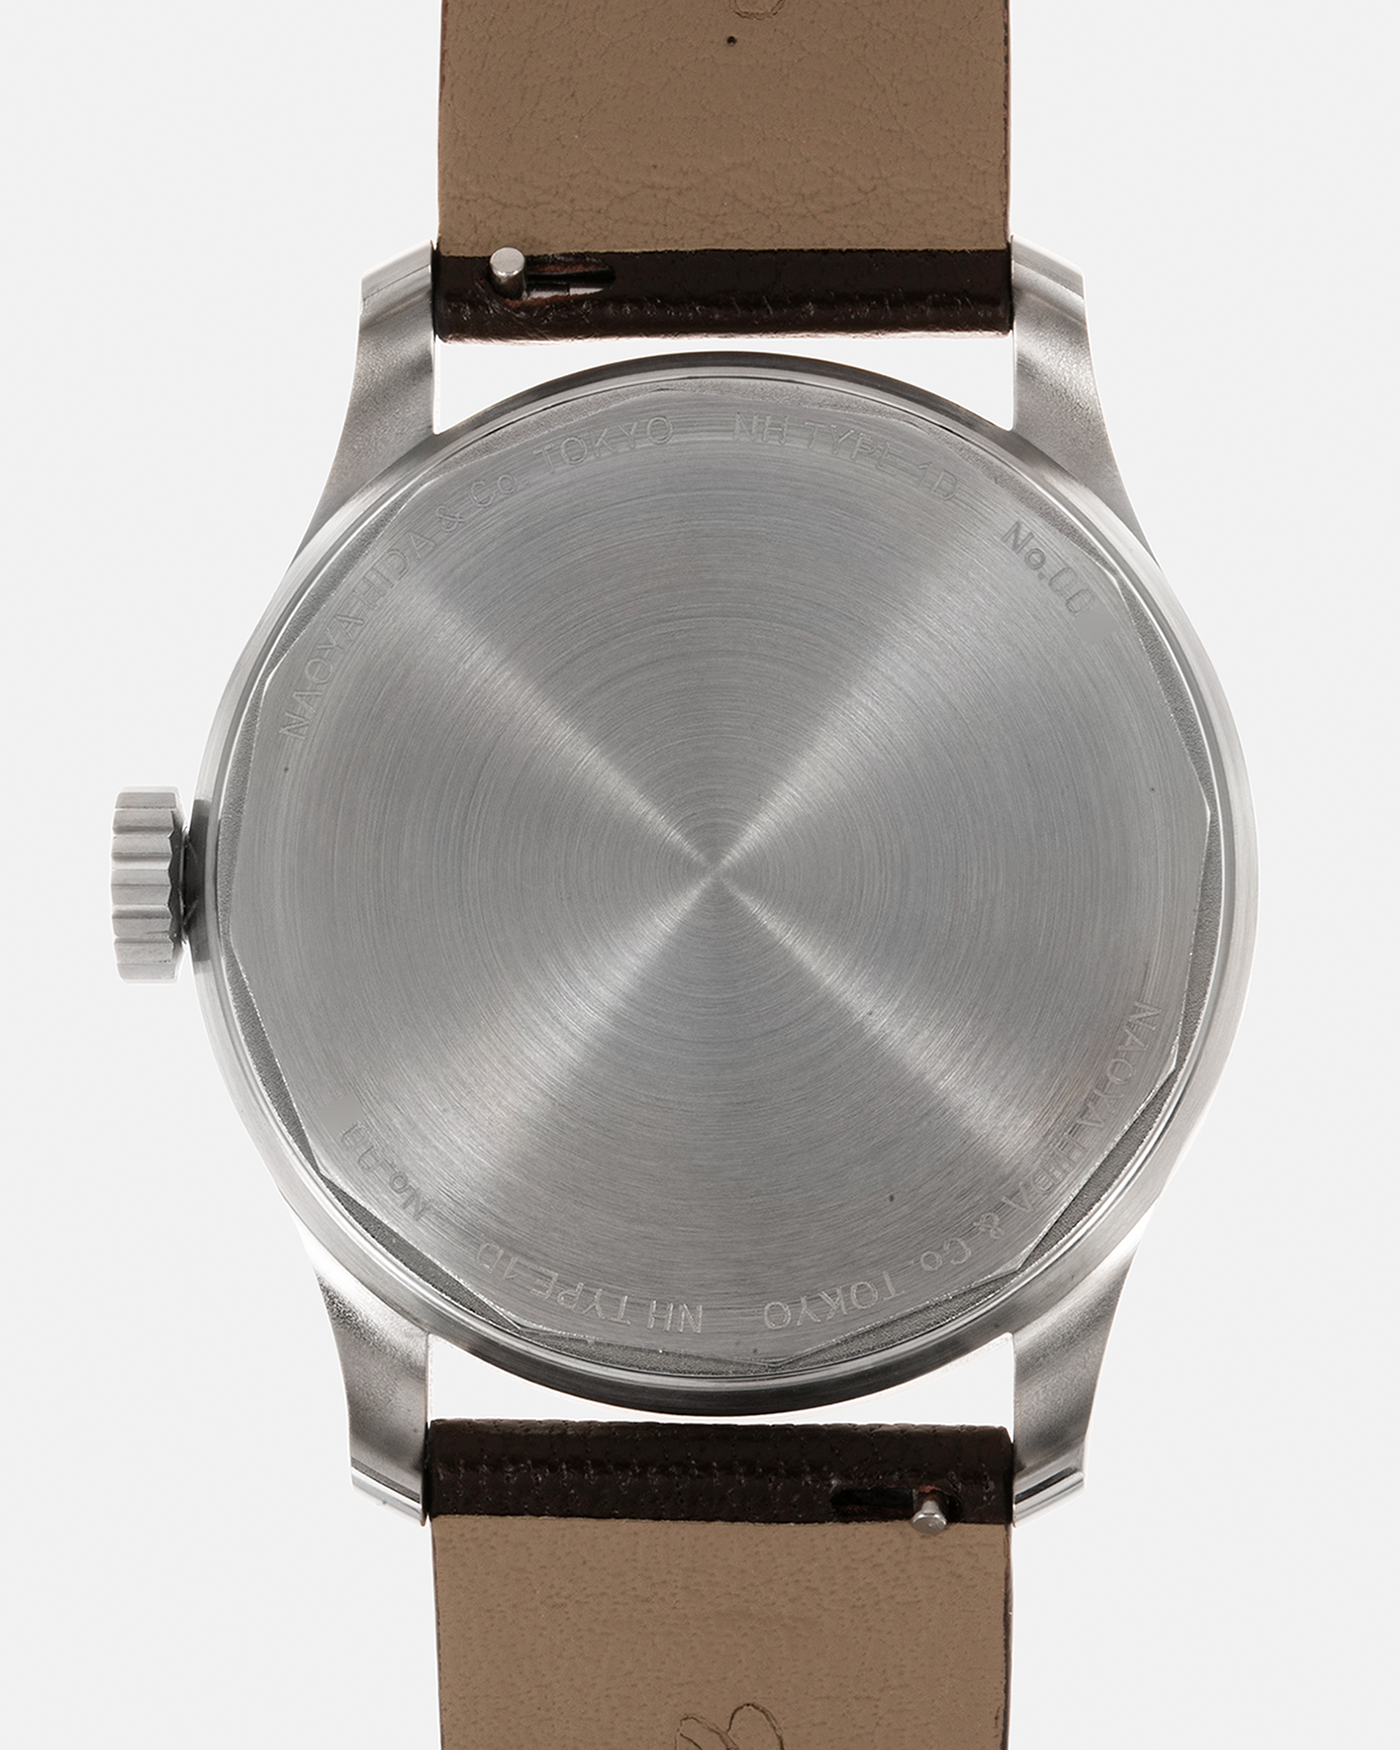 Brand: Naoya HIda Year: 2022 Model: NH Type 1D Material: 904L Stainless Steel Case, German Silver Dial  Movement: Cal. 3019SS, Manual-Winding Case Diameter: 37mm Strap: Naoya Hida Volinka Brown Leather Strap with Signed Stainless Steel Tang Buckle